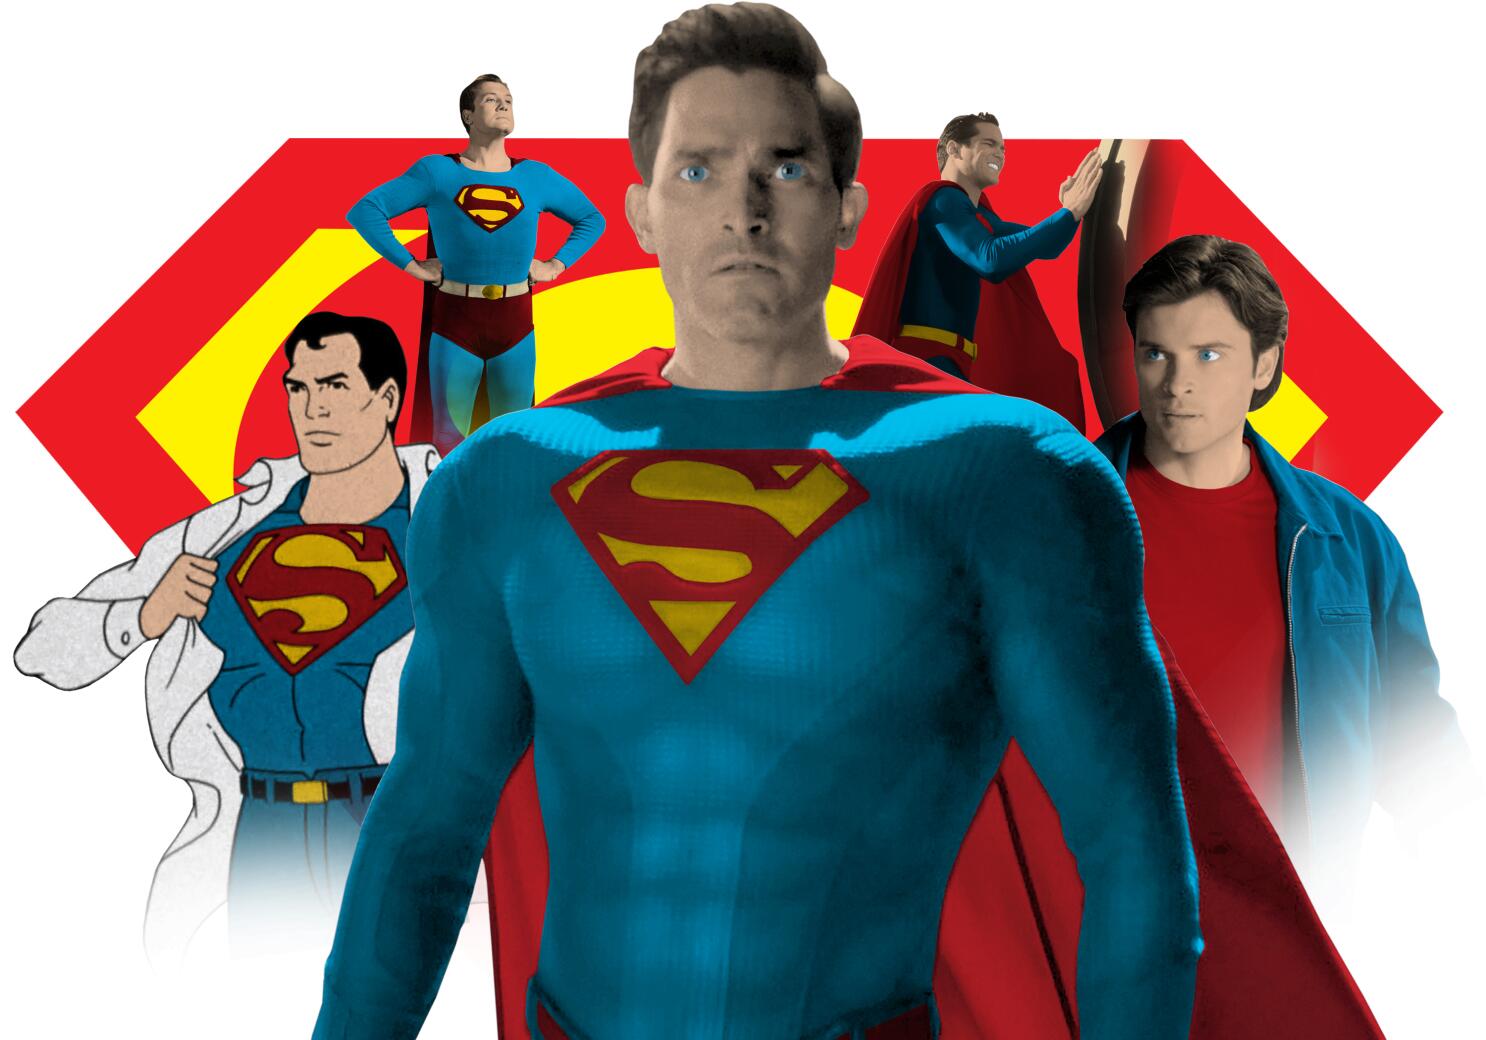 New Superman looks like if Henry Cavill and Tom Welling had a love